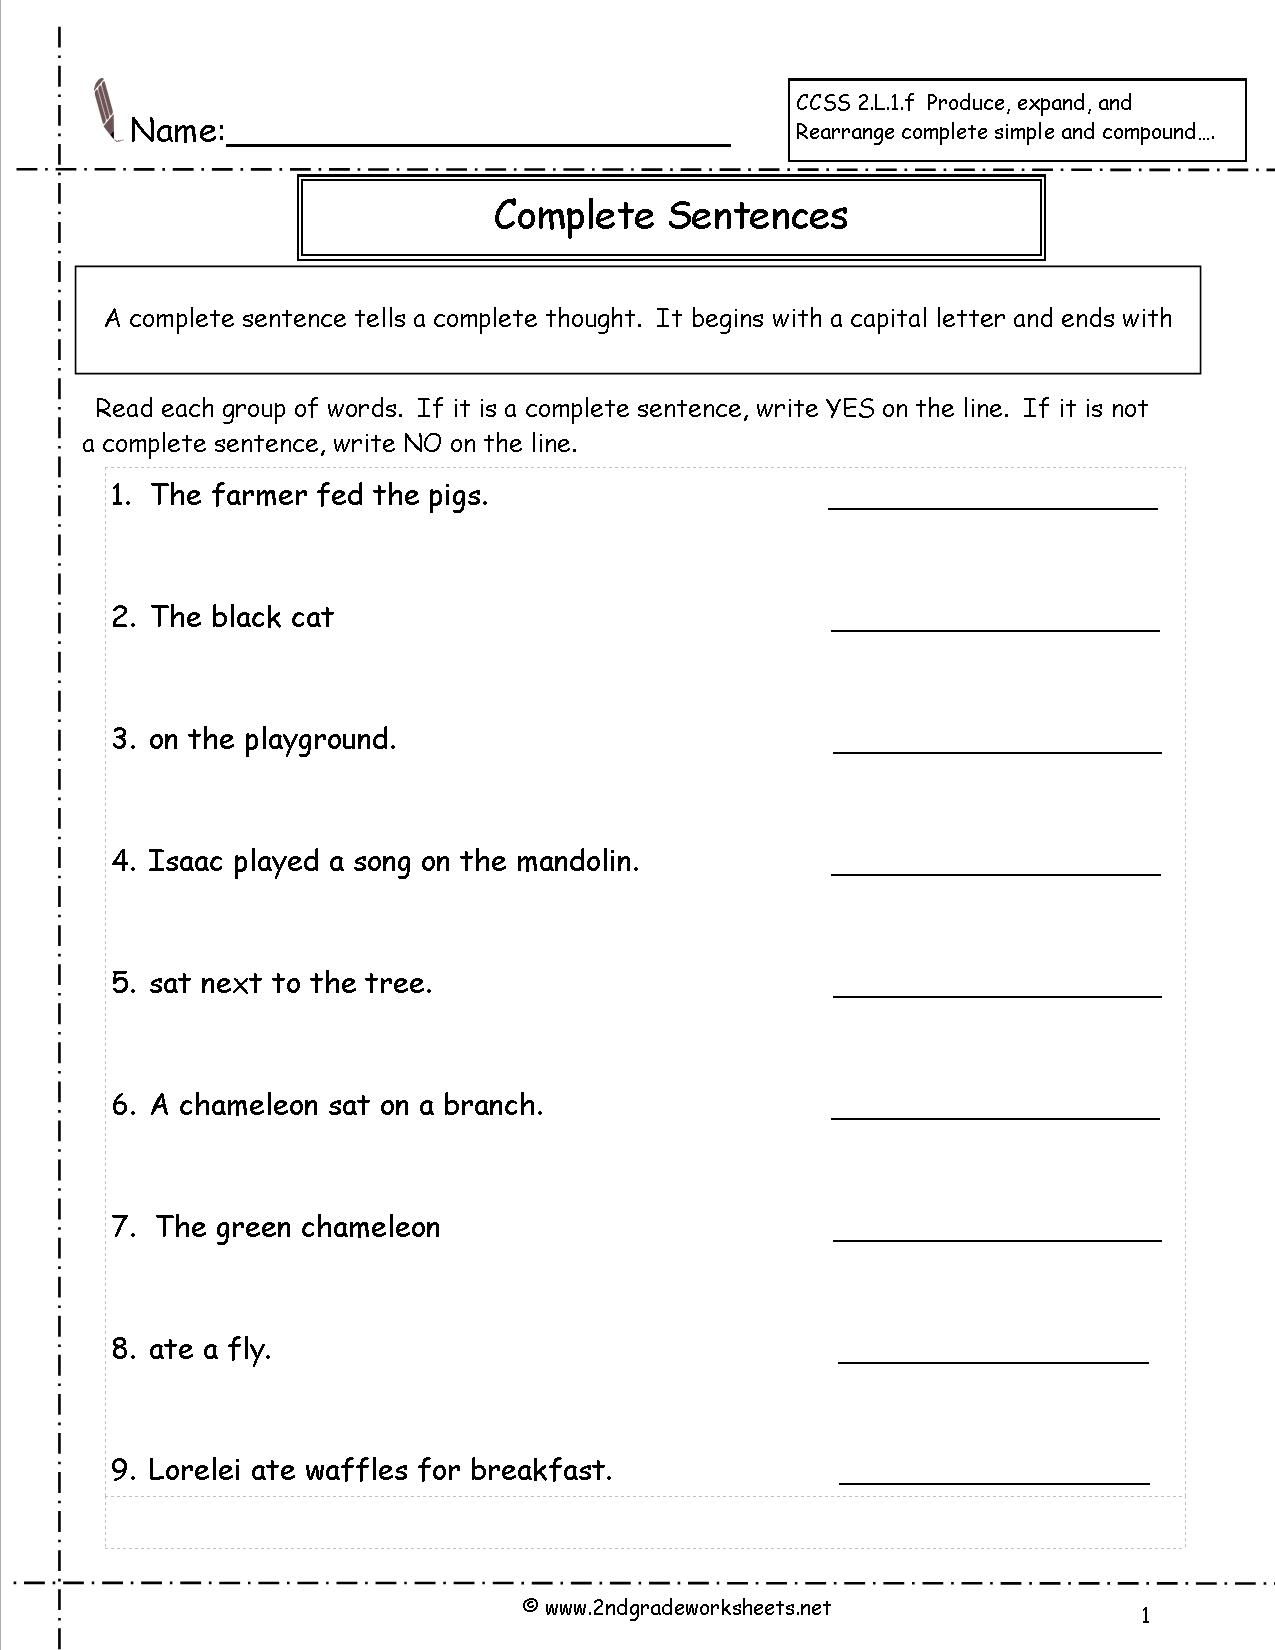 10 Best Images Of Worksheets Complete Subject Compound Sentence Worksheets Second Grade